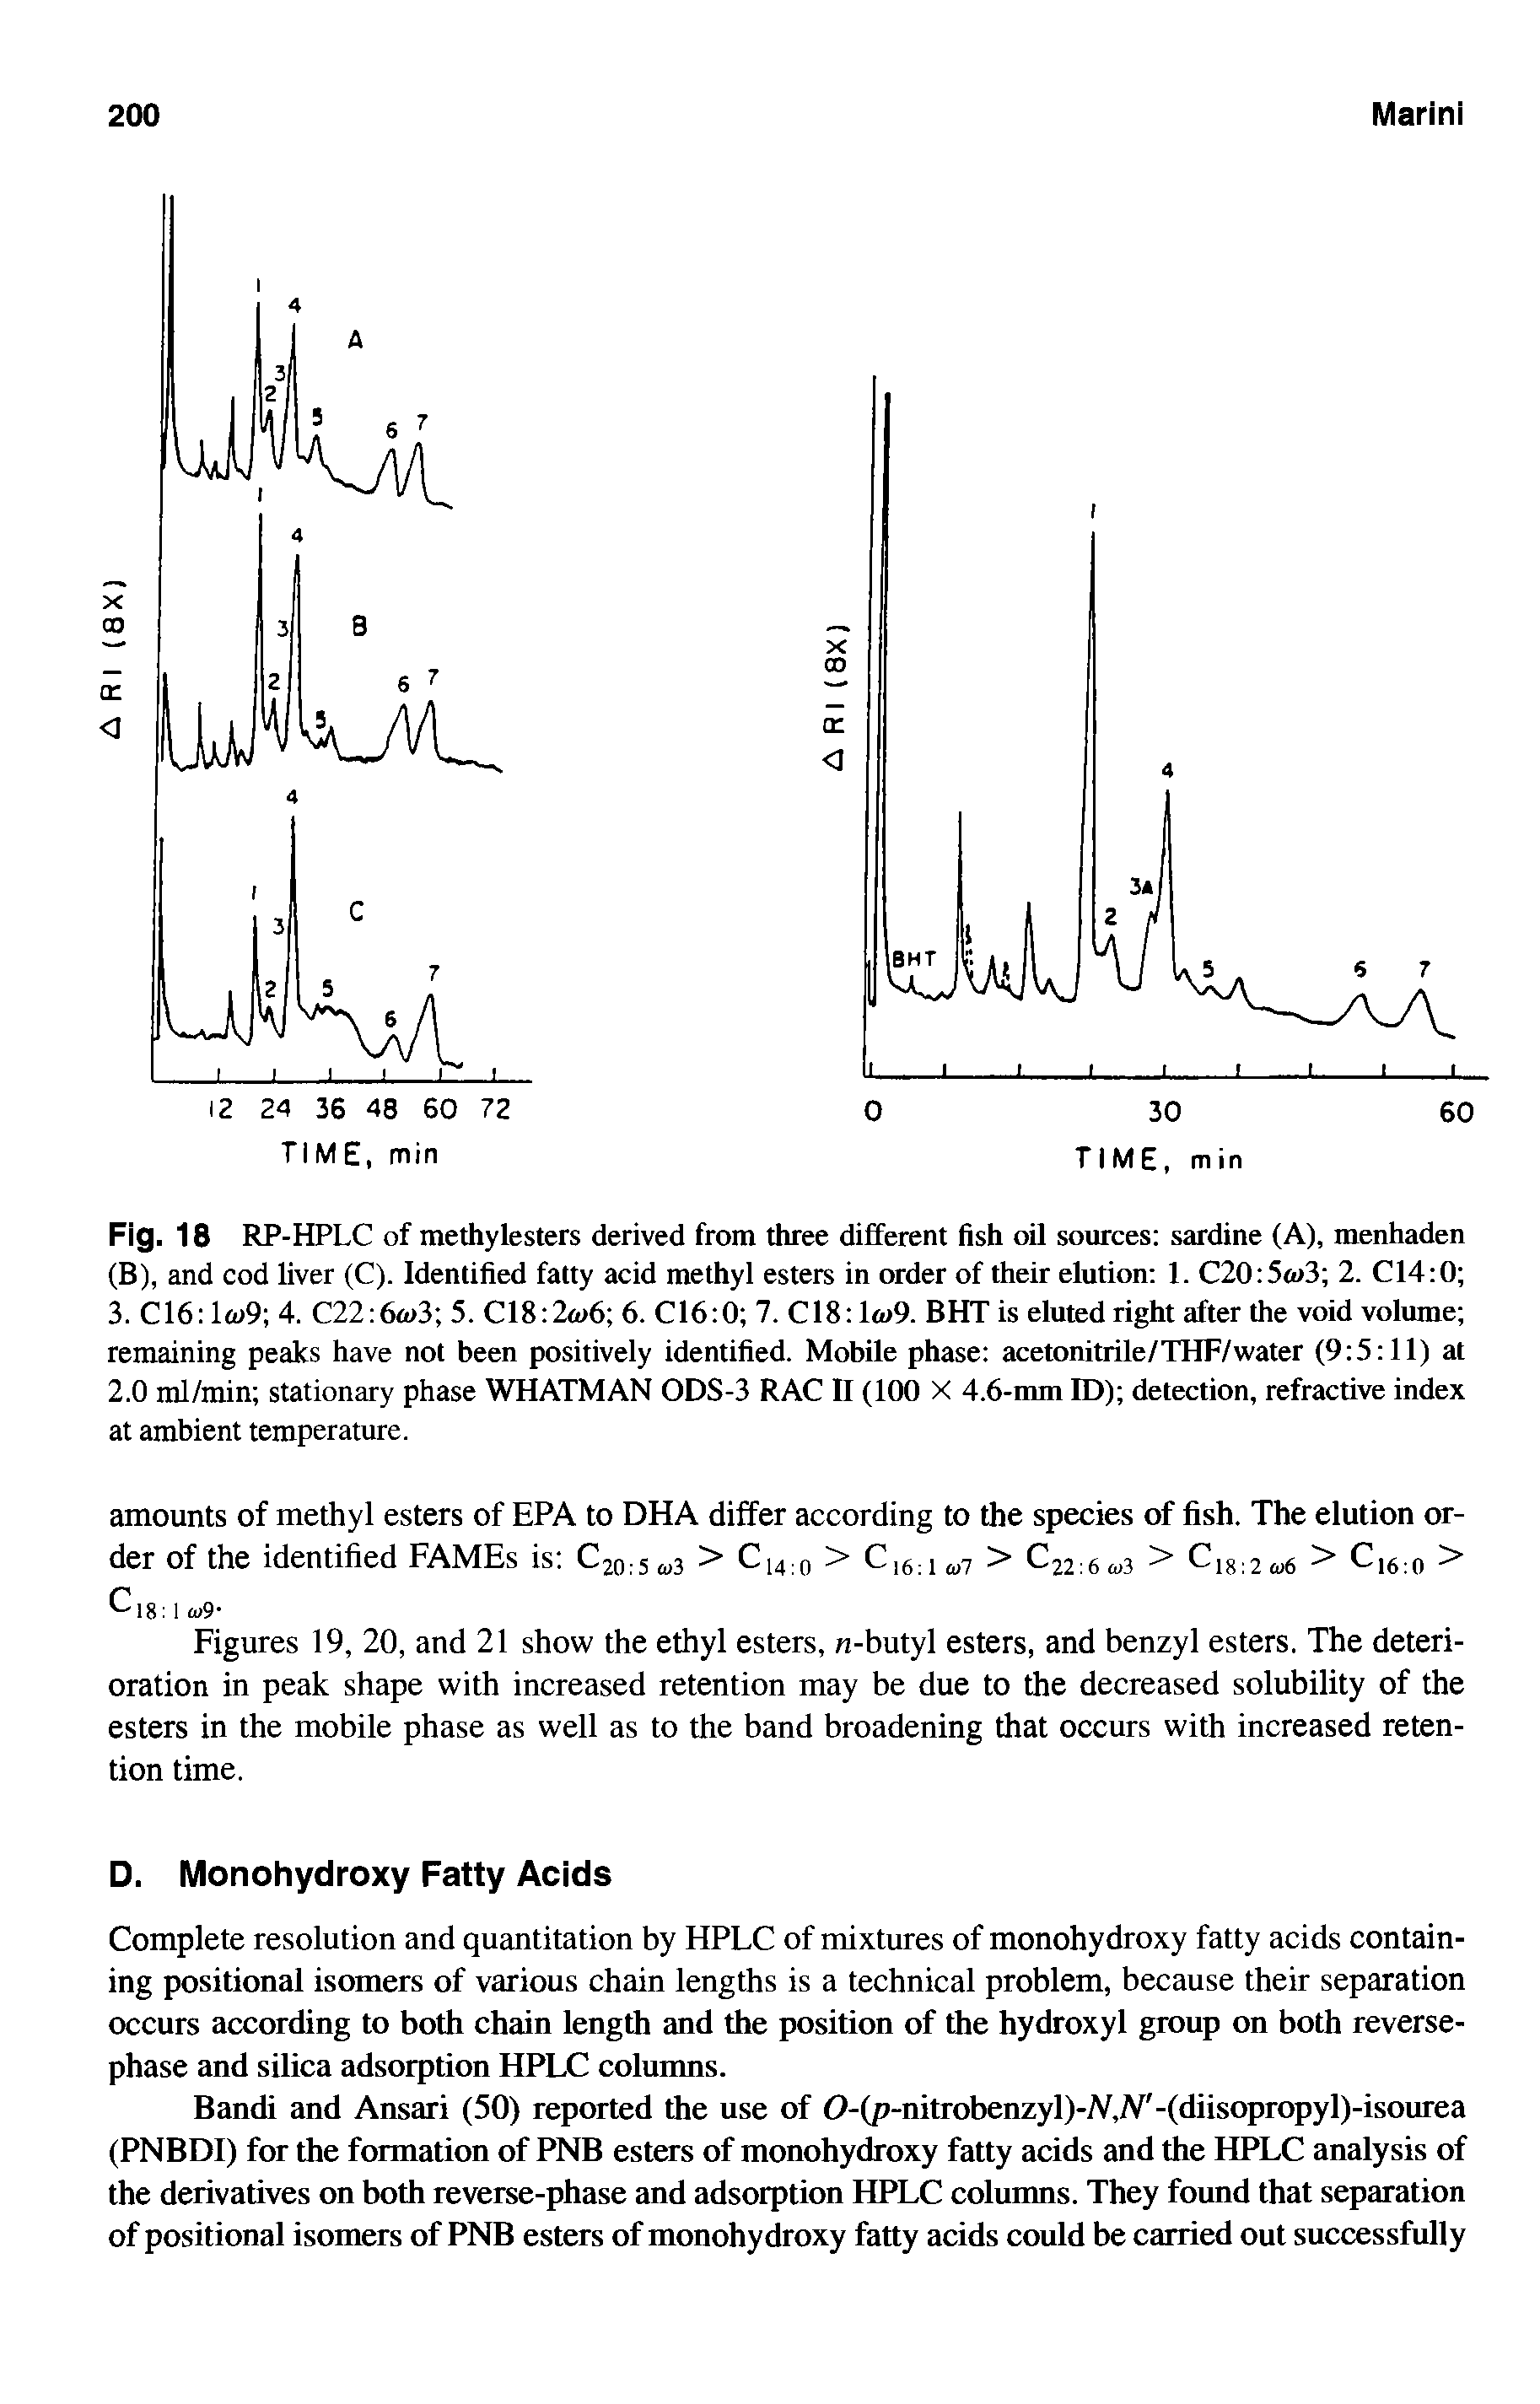 Figures 19, 20, and 21 show the ethyl esters, n-butyl esters, and benzyl esters. The deterioration in peak shape with increased retention may be due to the decreased solubility of the esters in the mobile phase as well as to the band broadening that occurs with increased retention time.